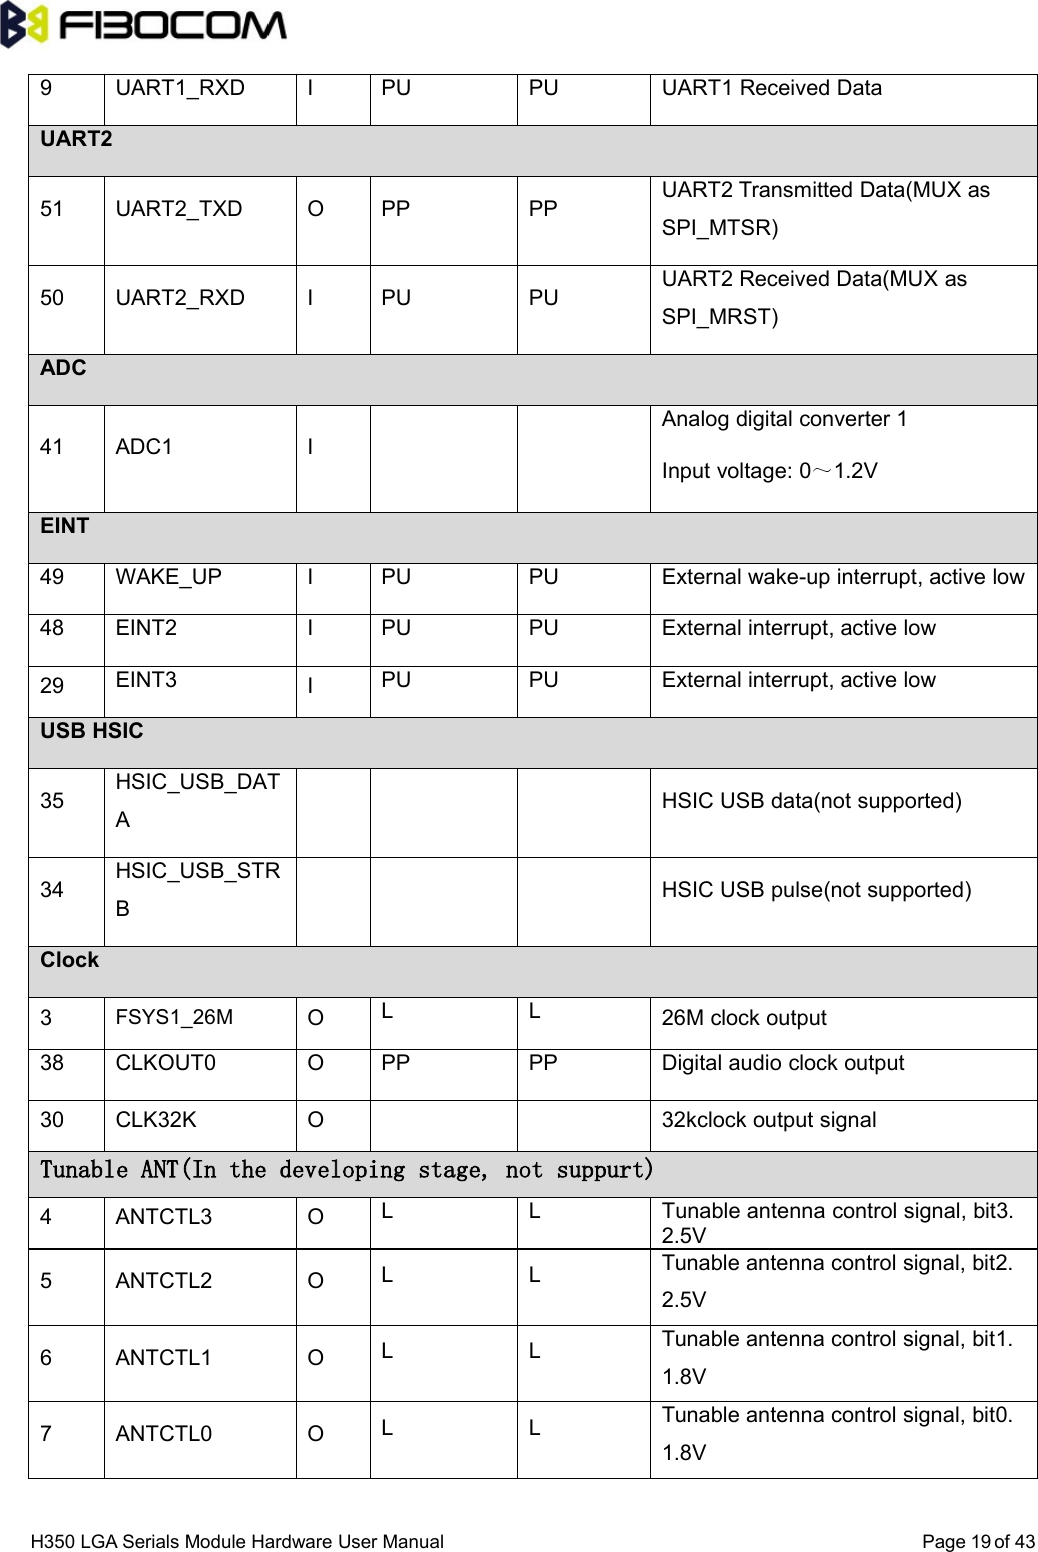 H350 LGA Serials Module Hardware User Manual Page of 43199 UART1_RXD I PU PU UART1 Received DataUART251 UART2_TXD O PP PPUART2 Transmitted Data(MUX asSPI_MTSR)50 UART2_RXD I PU PU UART2 Received Data(MUX asSPI_MRST)ADC41 ADC1 IAnalog digital converter 1Input voltage: 0～1.2VEINT49 WAKE_UP I PU PU External wake-up interrupt, active low48 EINT2 I PU PU External interrupt, active low29 EINT3 IPU PU External interrupt, active lowUSB HSIC35 HSIC_USB_DATAHSIC USB data(not supported)34 HSIC_USB_STRBHSIC USB pulse(not supported)Clock3FSYS1_26M OL L 26M clock output38 CLKOUT0 O PP PP Digital audio clock output30 CLK32K O 32kclock output signalTunable ANT(In the developing stage, not suppurt)4 ANTCTL3 O L L Tunable antenna control signal, bit3.2.5V5 ANTCTL2 O L L Tunable antenna control signal, bit2.2.5V6 ANTCTL1 O L L Tunable antenna control signal, bit1.1.8V7 ANTCTL0 O L L Tunable antenna control signal, bit0.1.8V